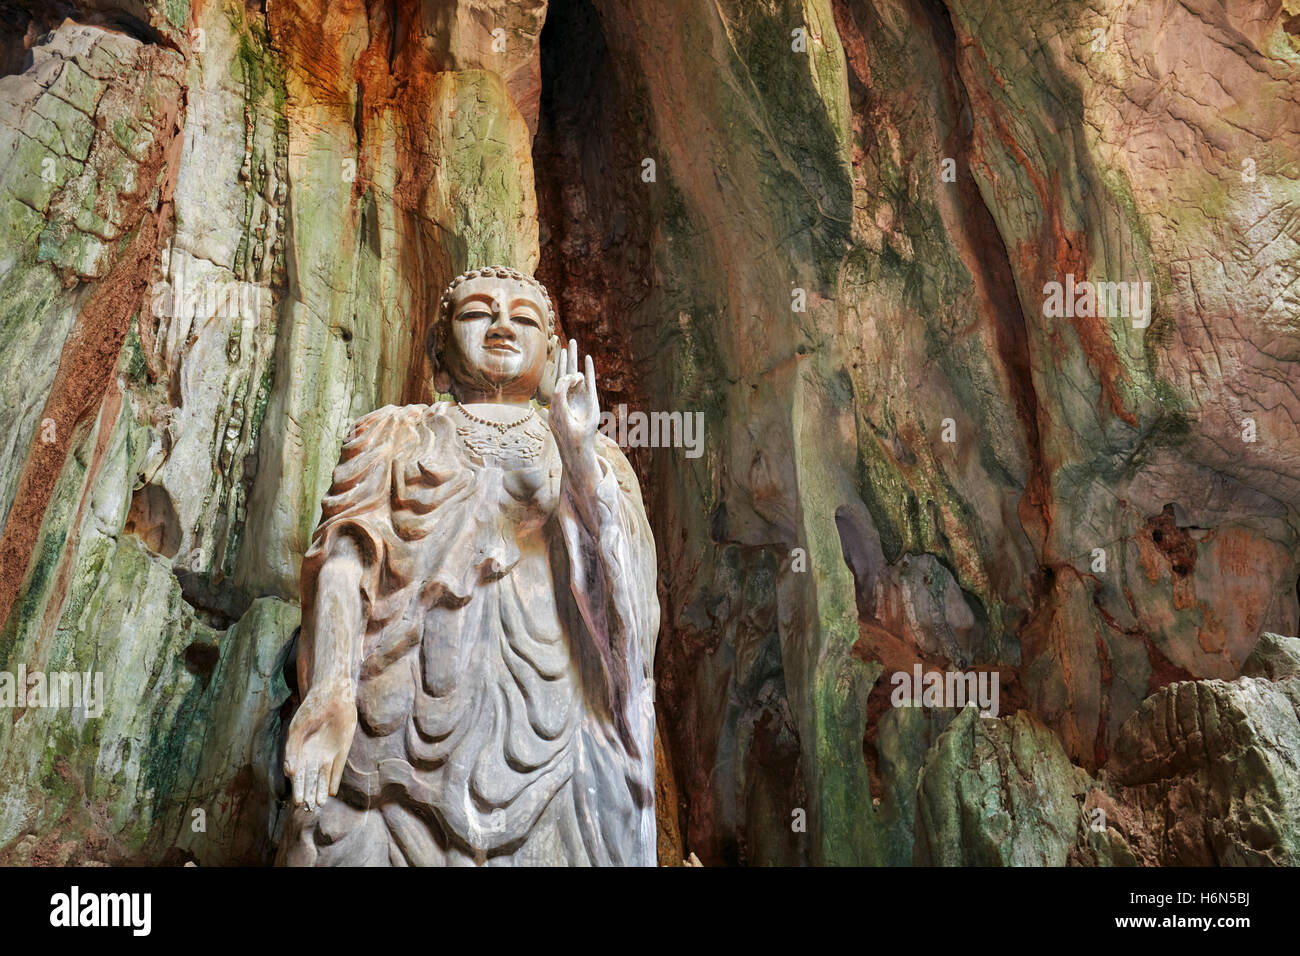 The Upright Buddha statue in Tang Chon Cave. Thuy Son Mountain, The Marble Mountains, Da Nang, Vietnam. Stock Photo